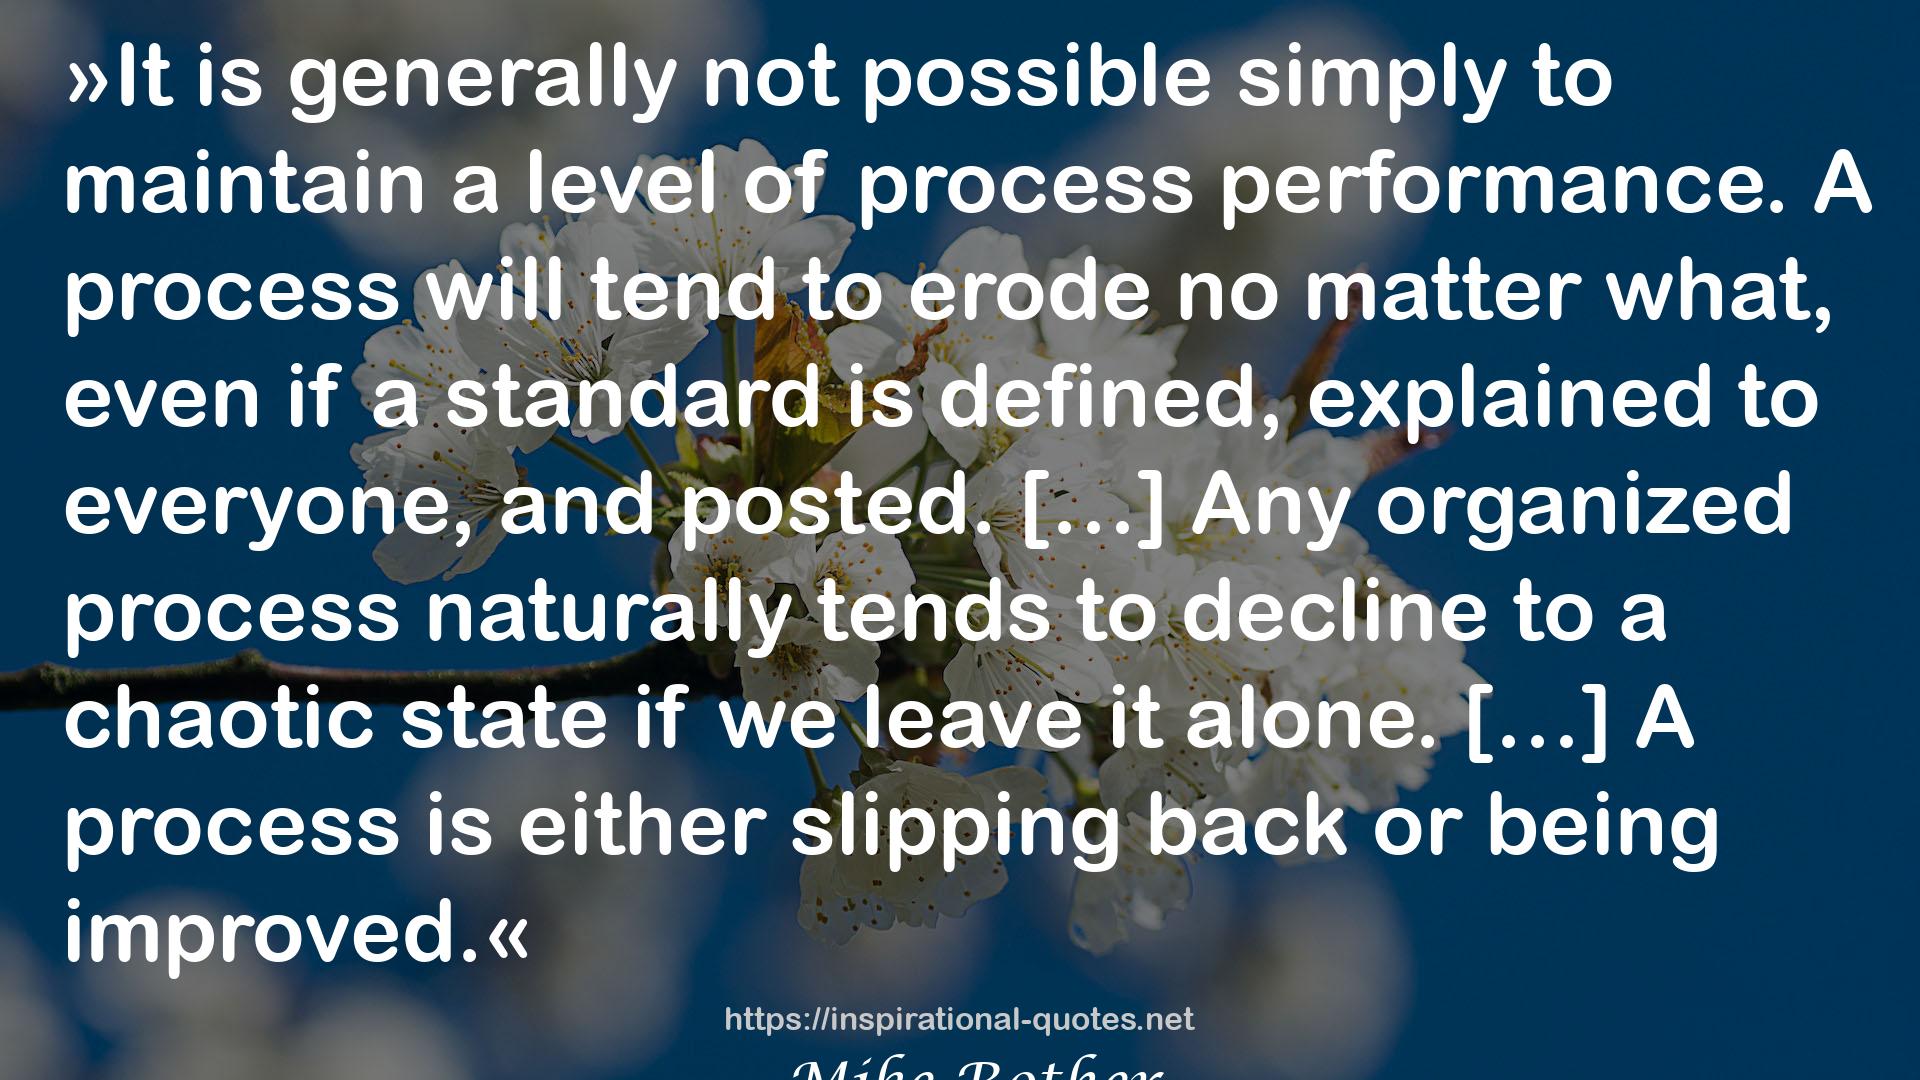 Toyota Kata: Managing People for Improvement, Adaptiveness and Superior Results QUOTES